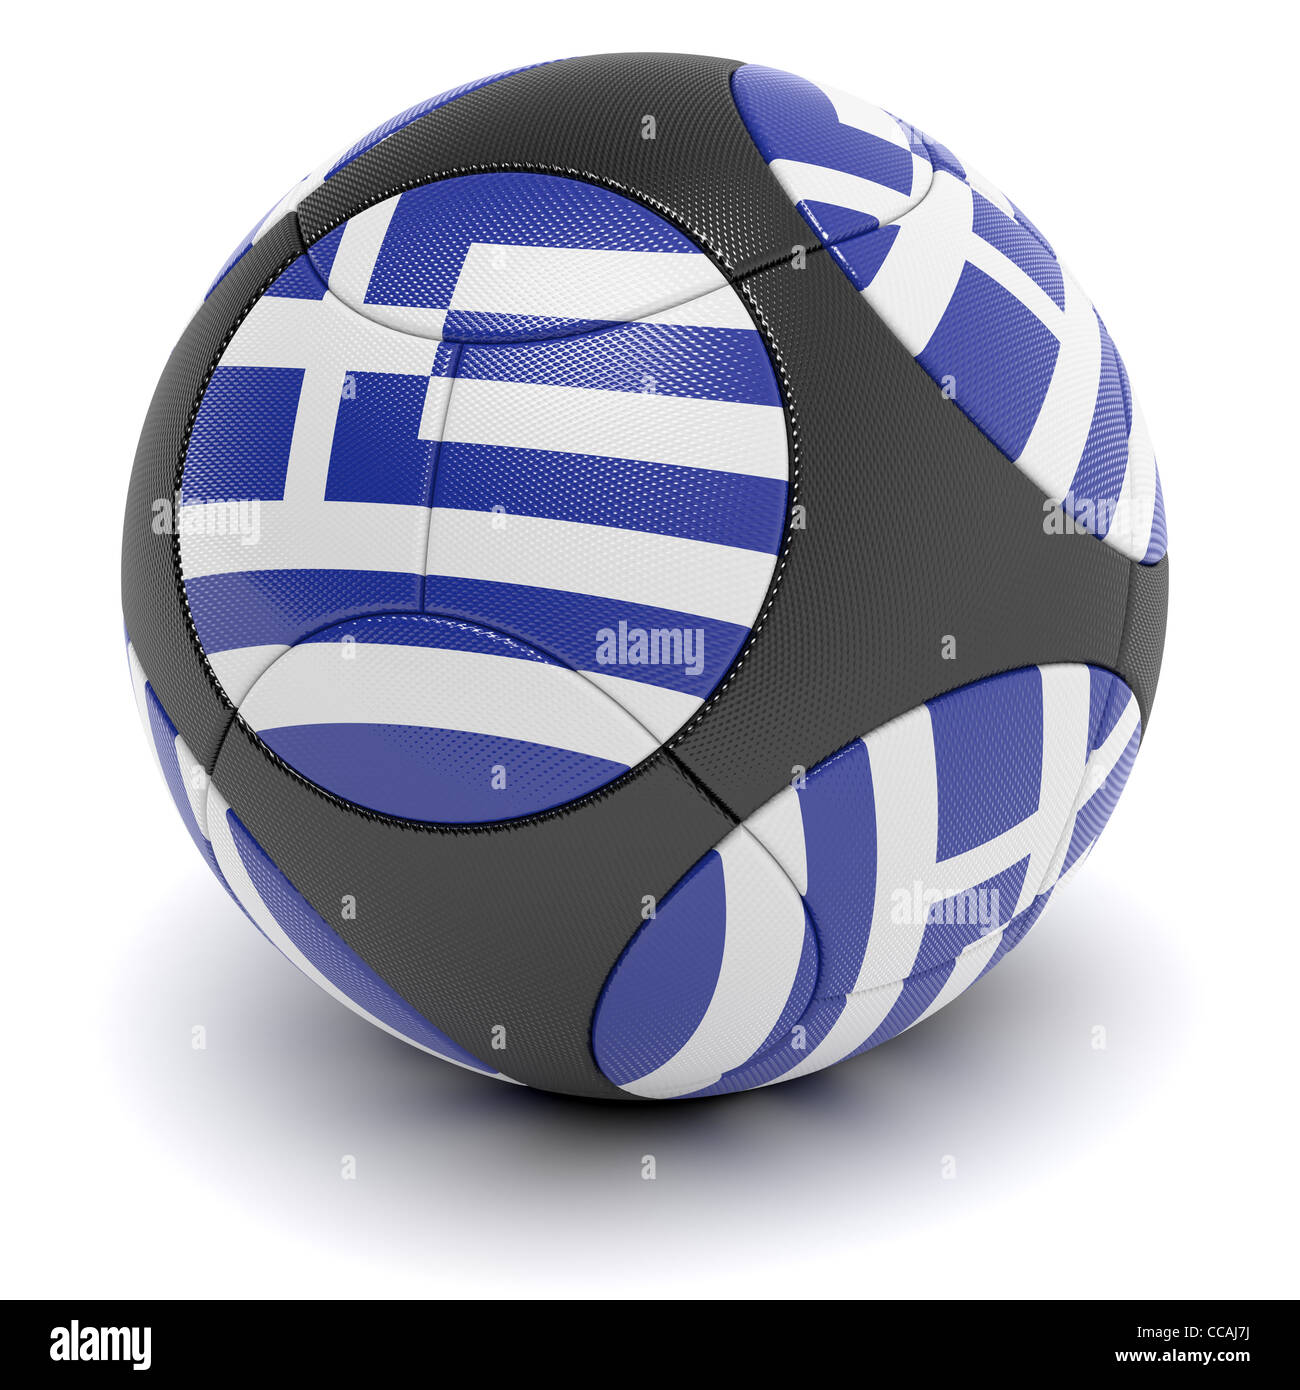 Soccer match ball of the 2012 European Championship with the flag of Greece - clipping path included Stock Photo